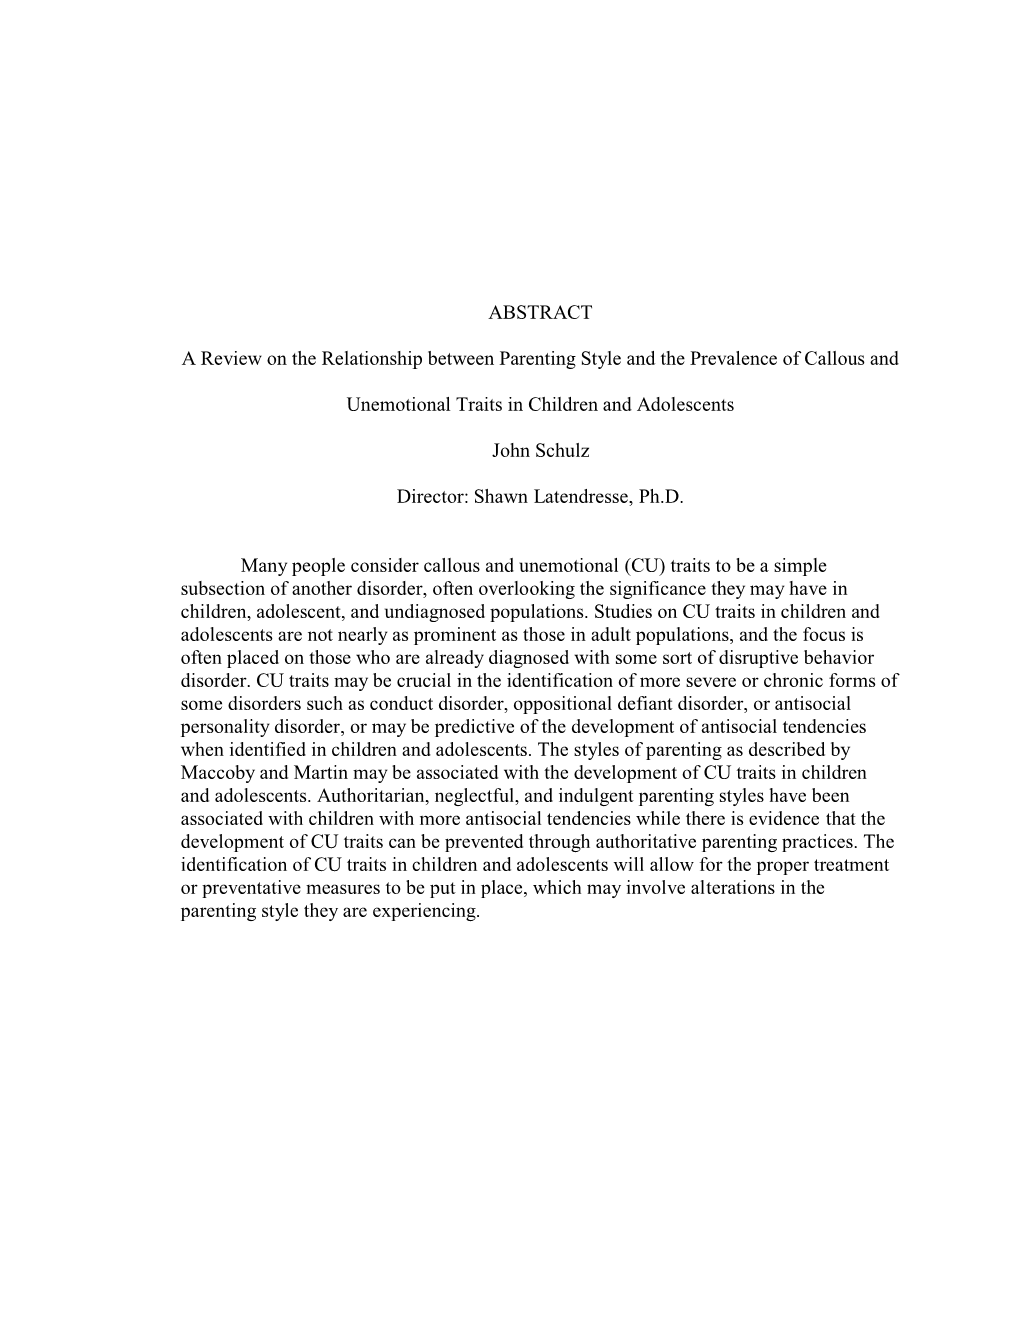 ABSTRACT a Review on the Relationship Between Parenting